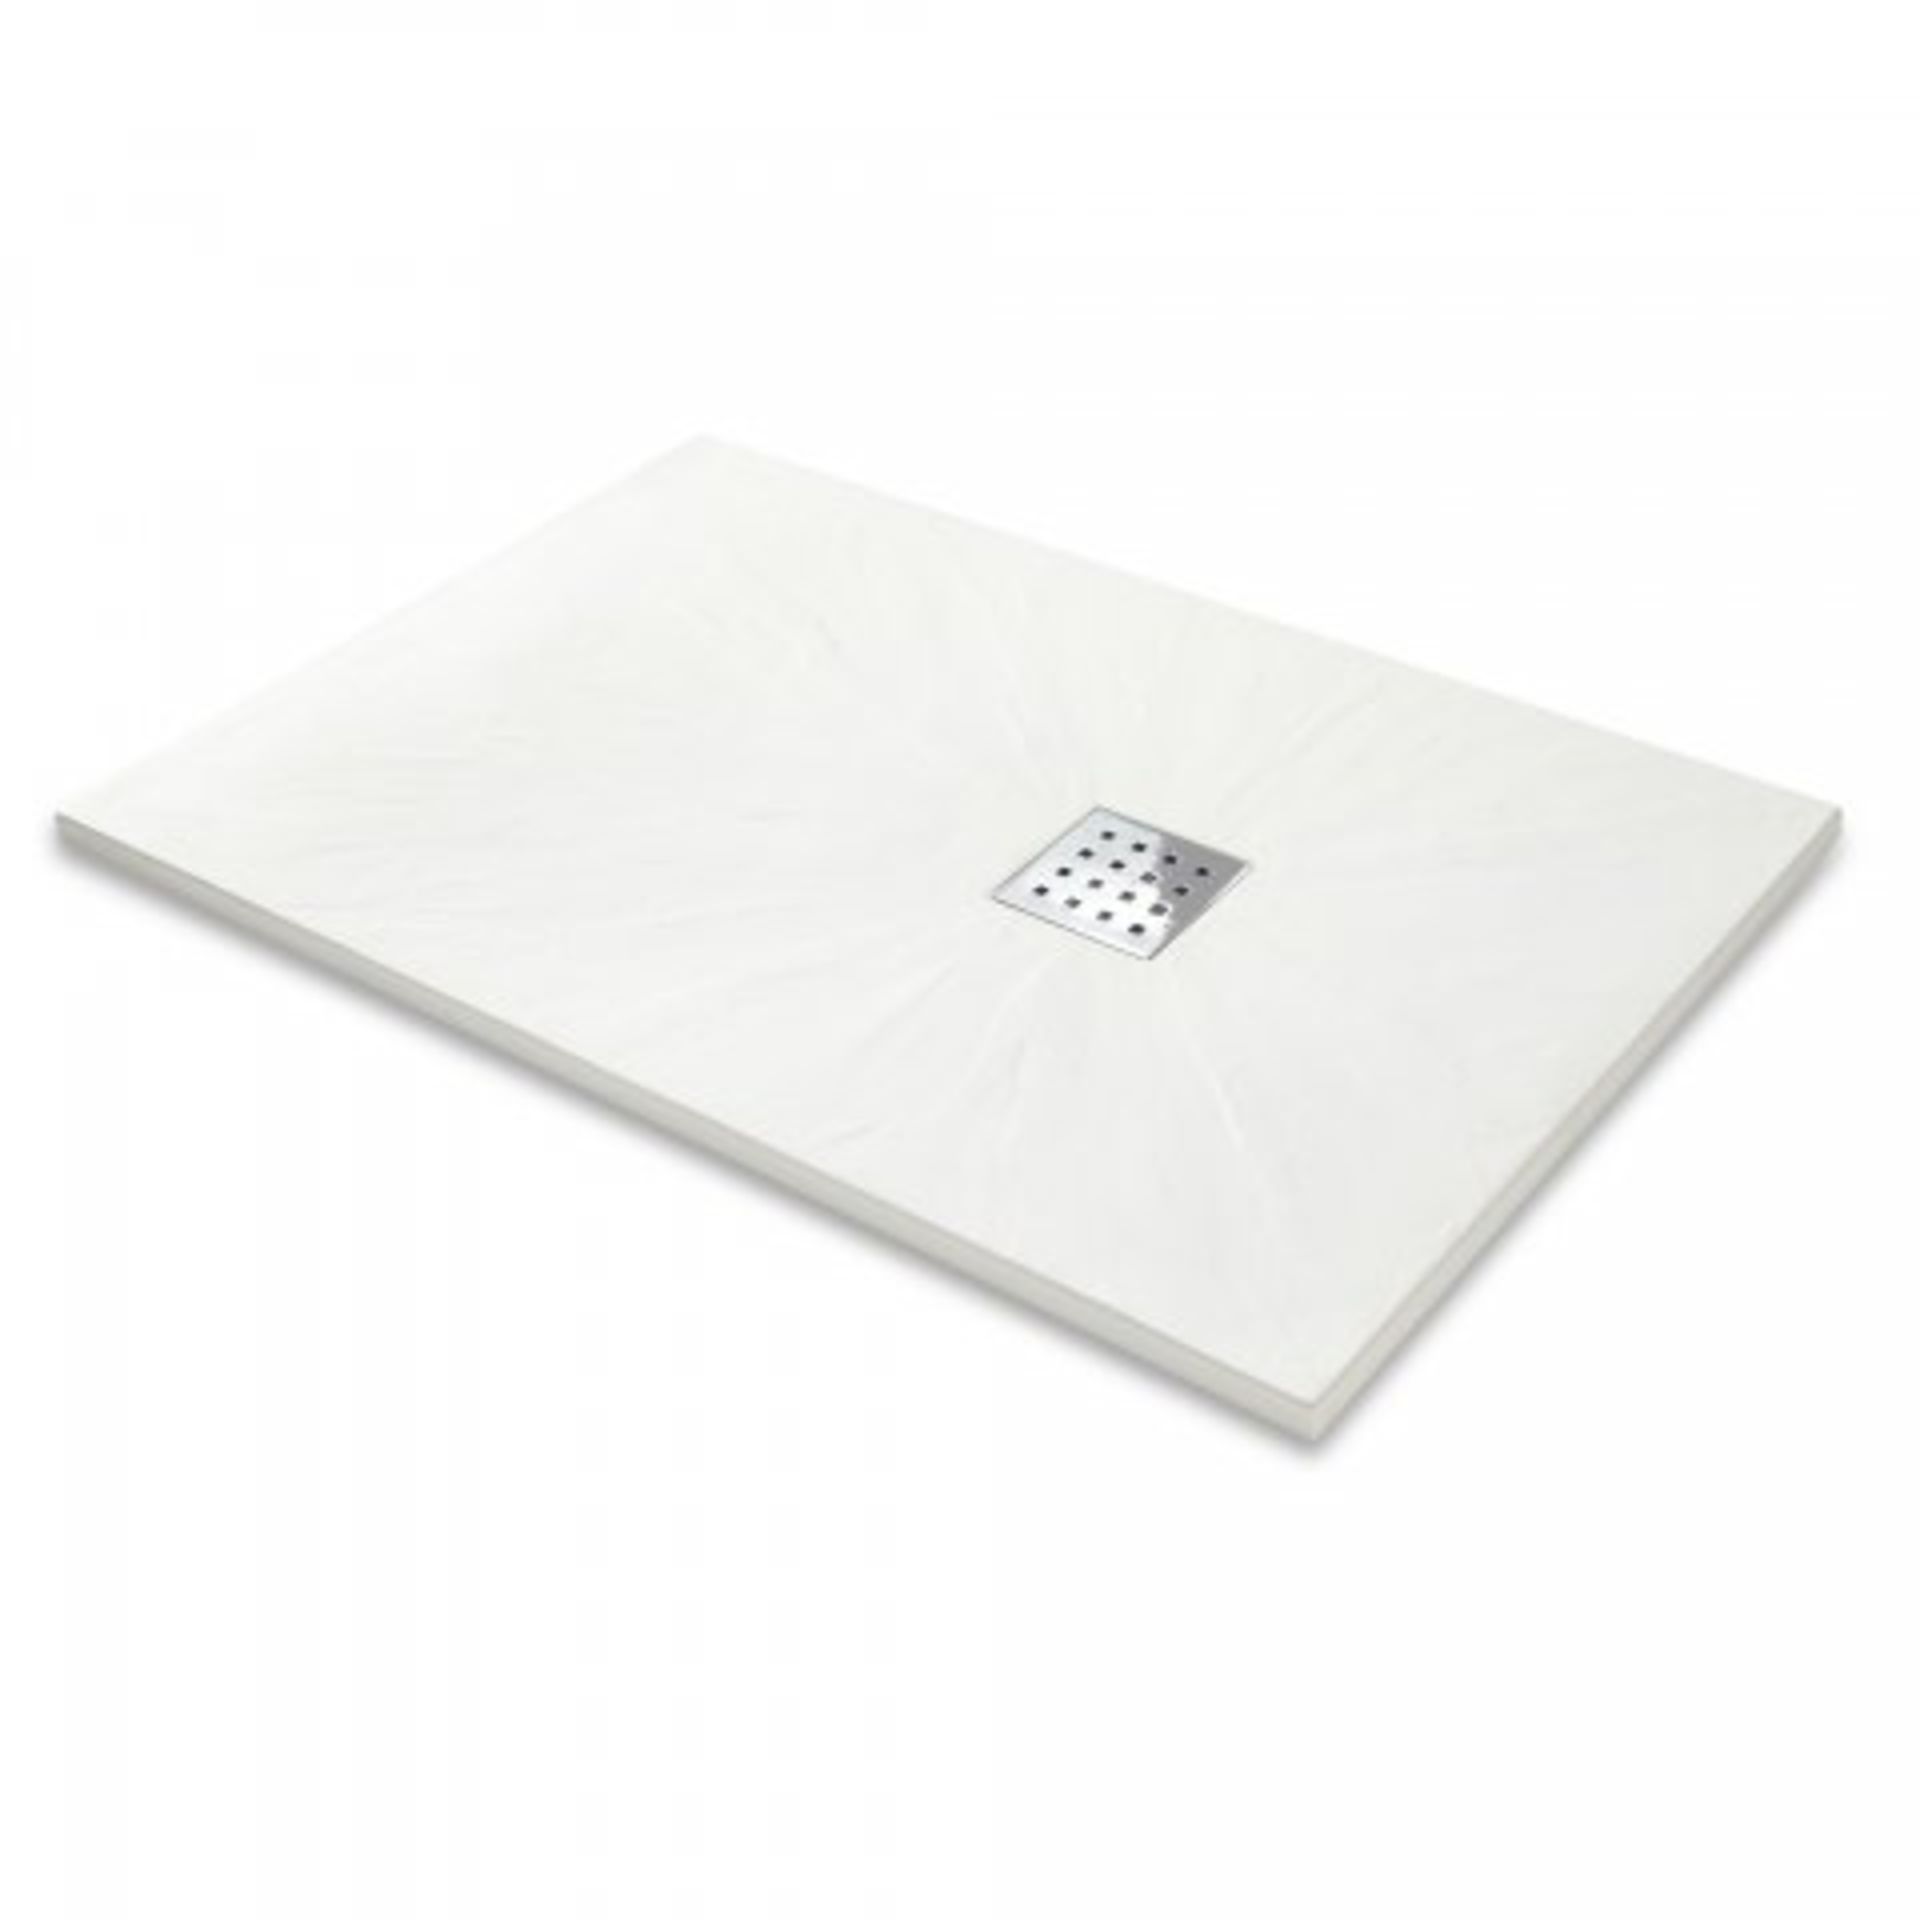 NEW 1200x800mm Rectangular White Slate Effect Shower Tray & Chrome Waste. RRP £549.99.Hand cra... - Image 2 of 2